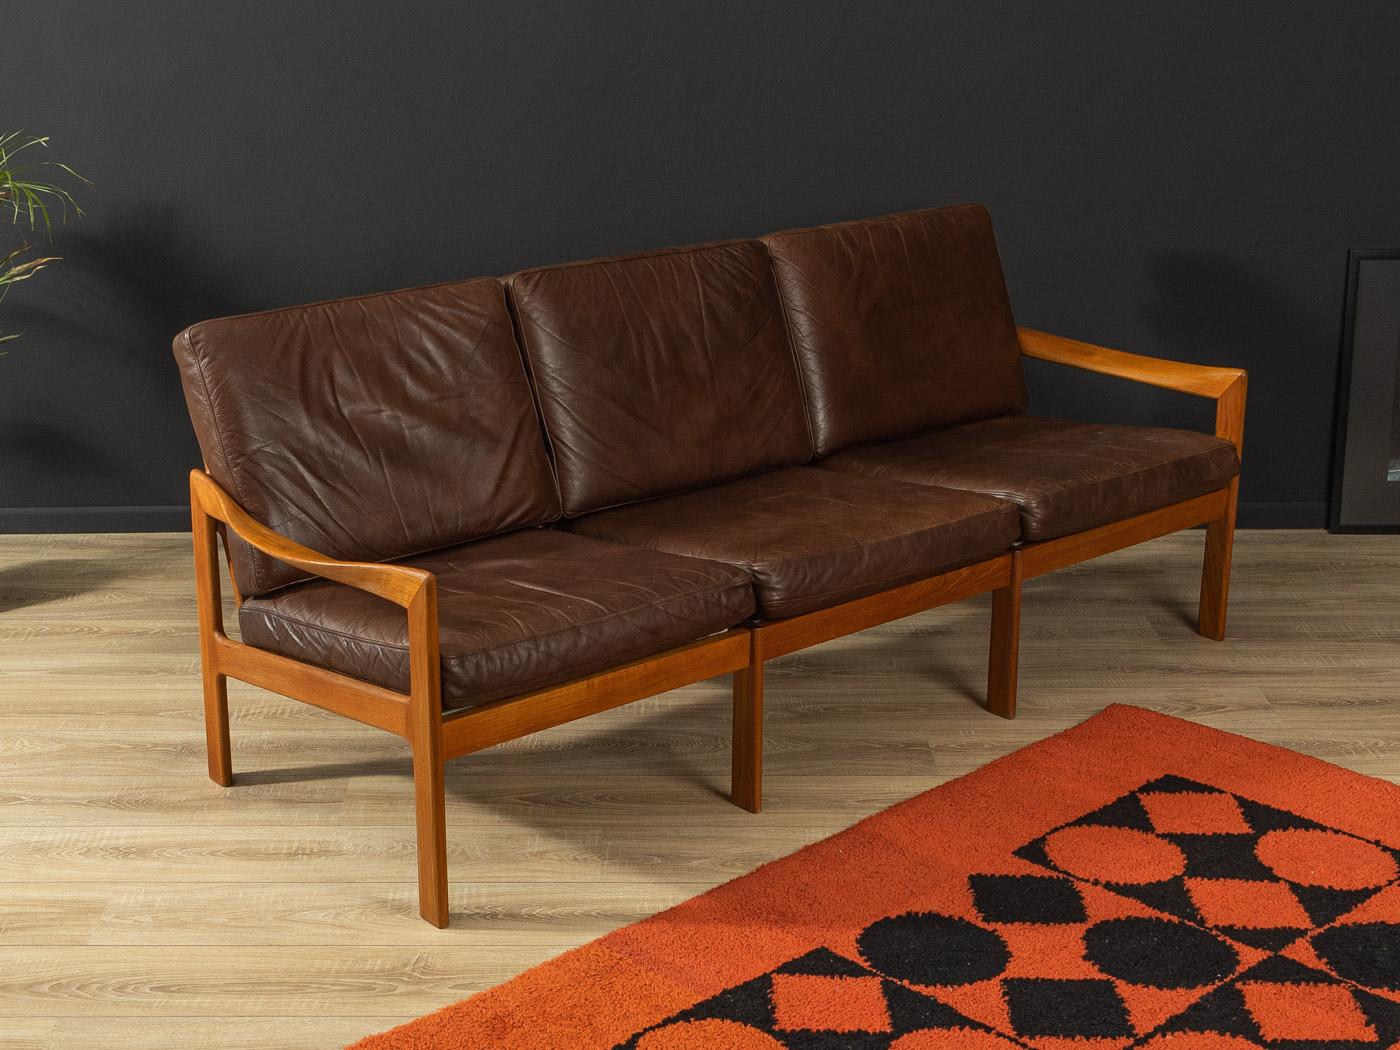 Classic sofa from the 1960s. High-quality frame made of solid teak with the high-quality original leather cover in brown.

Quality Features:
- accomplished design: perfect proportions and visible attention to detail
- high-quality workmanship